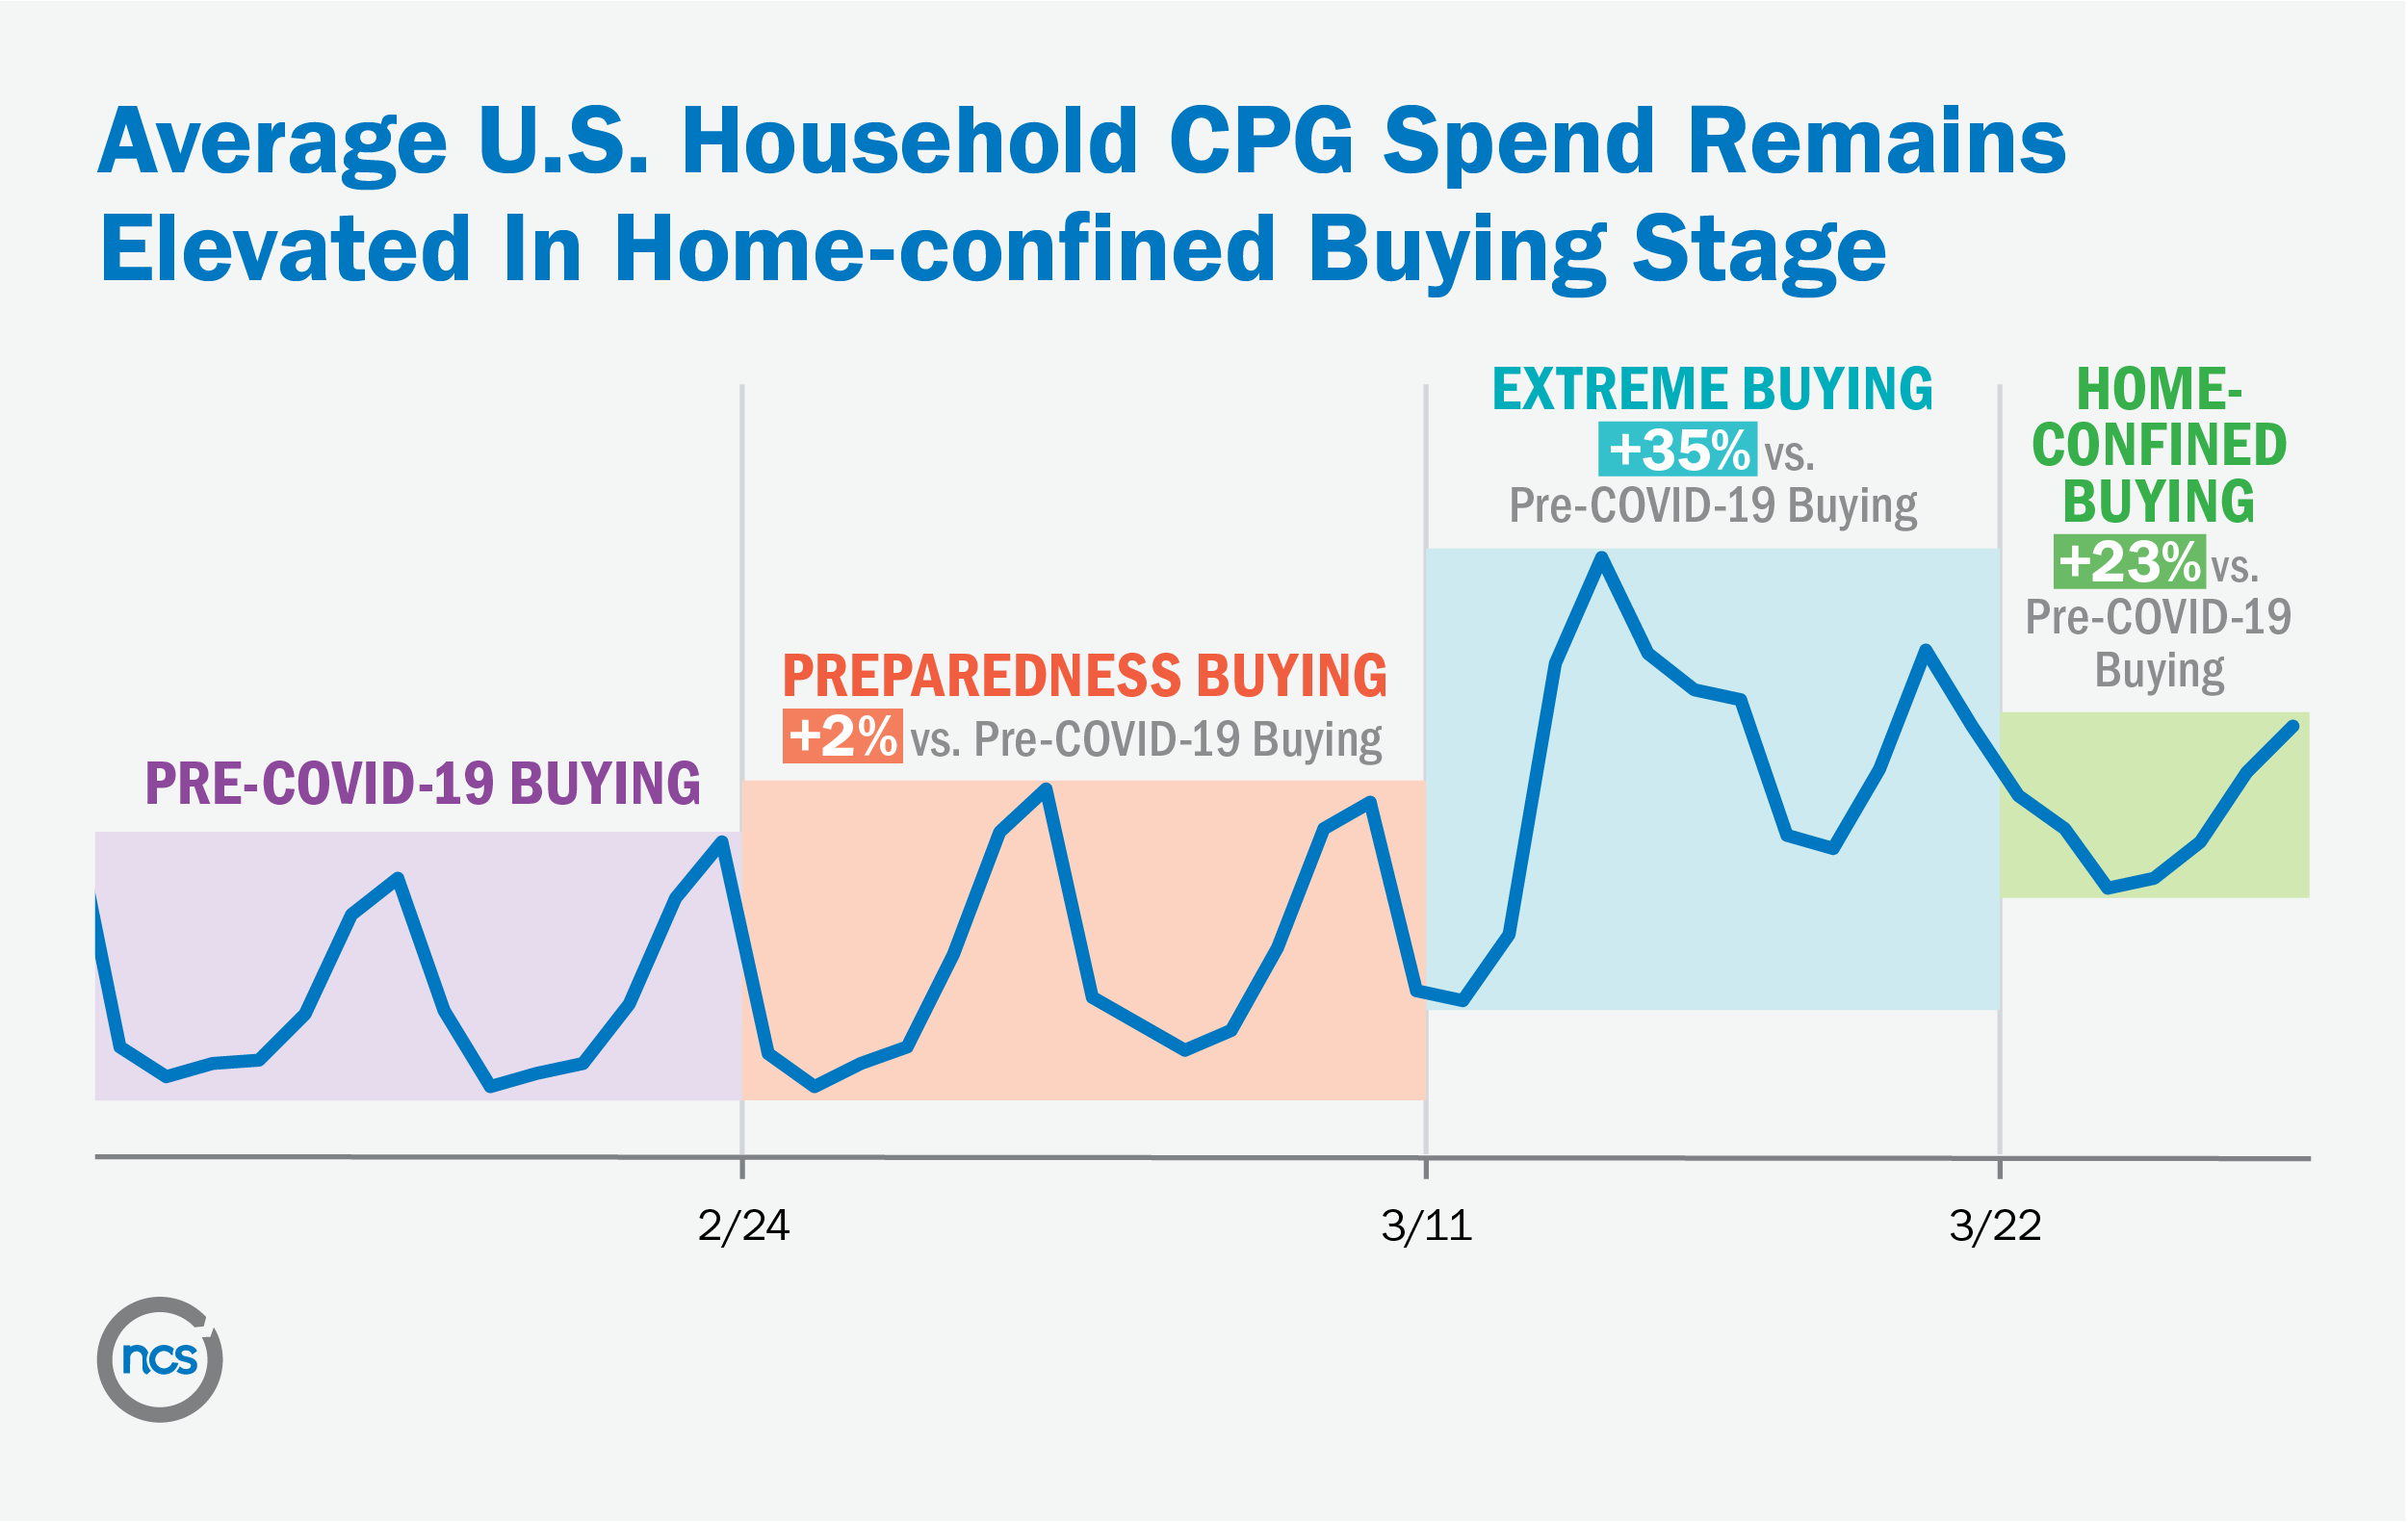 Average U.S. household CPG spend remains elevated in home-confined buying stage at the beginning of April 2020.